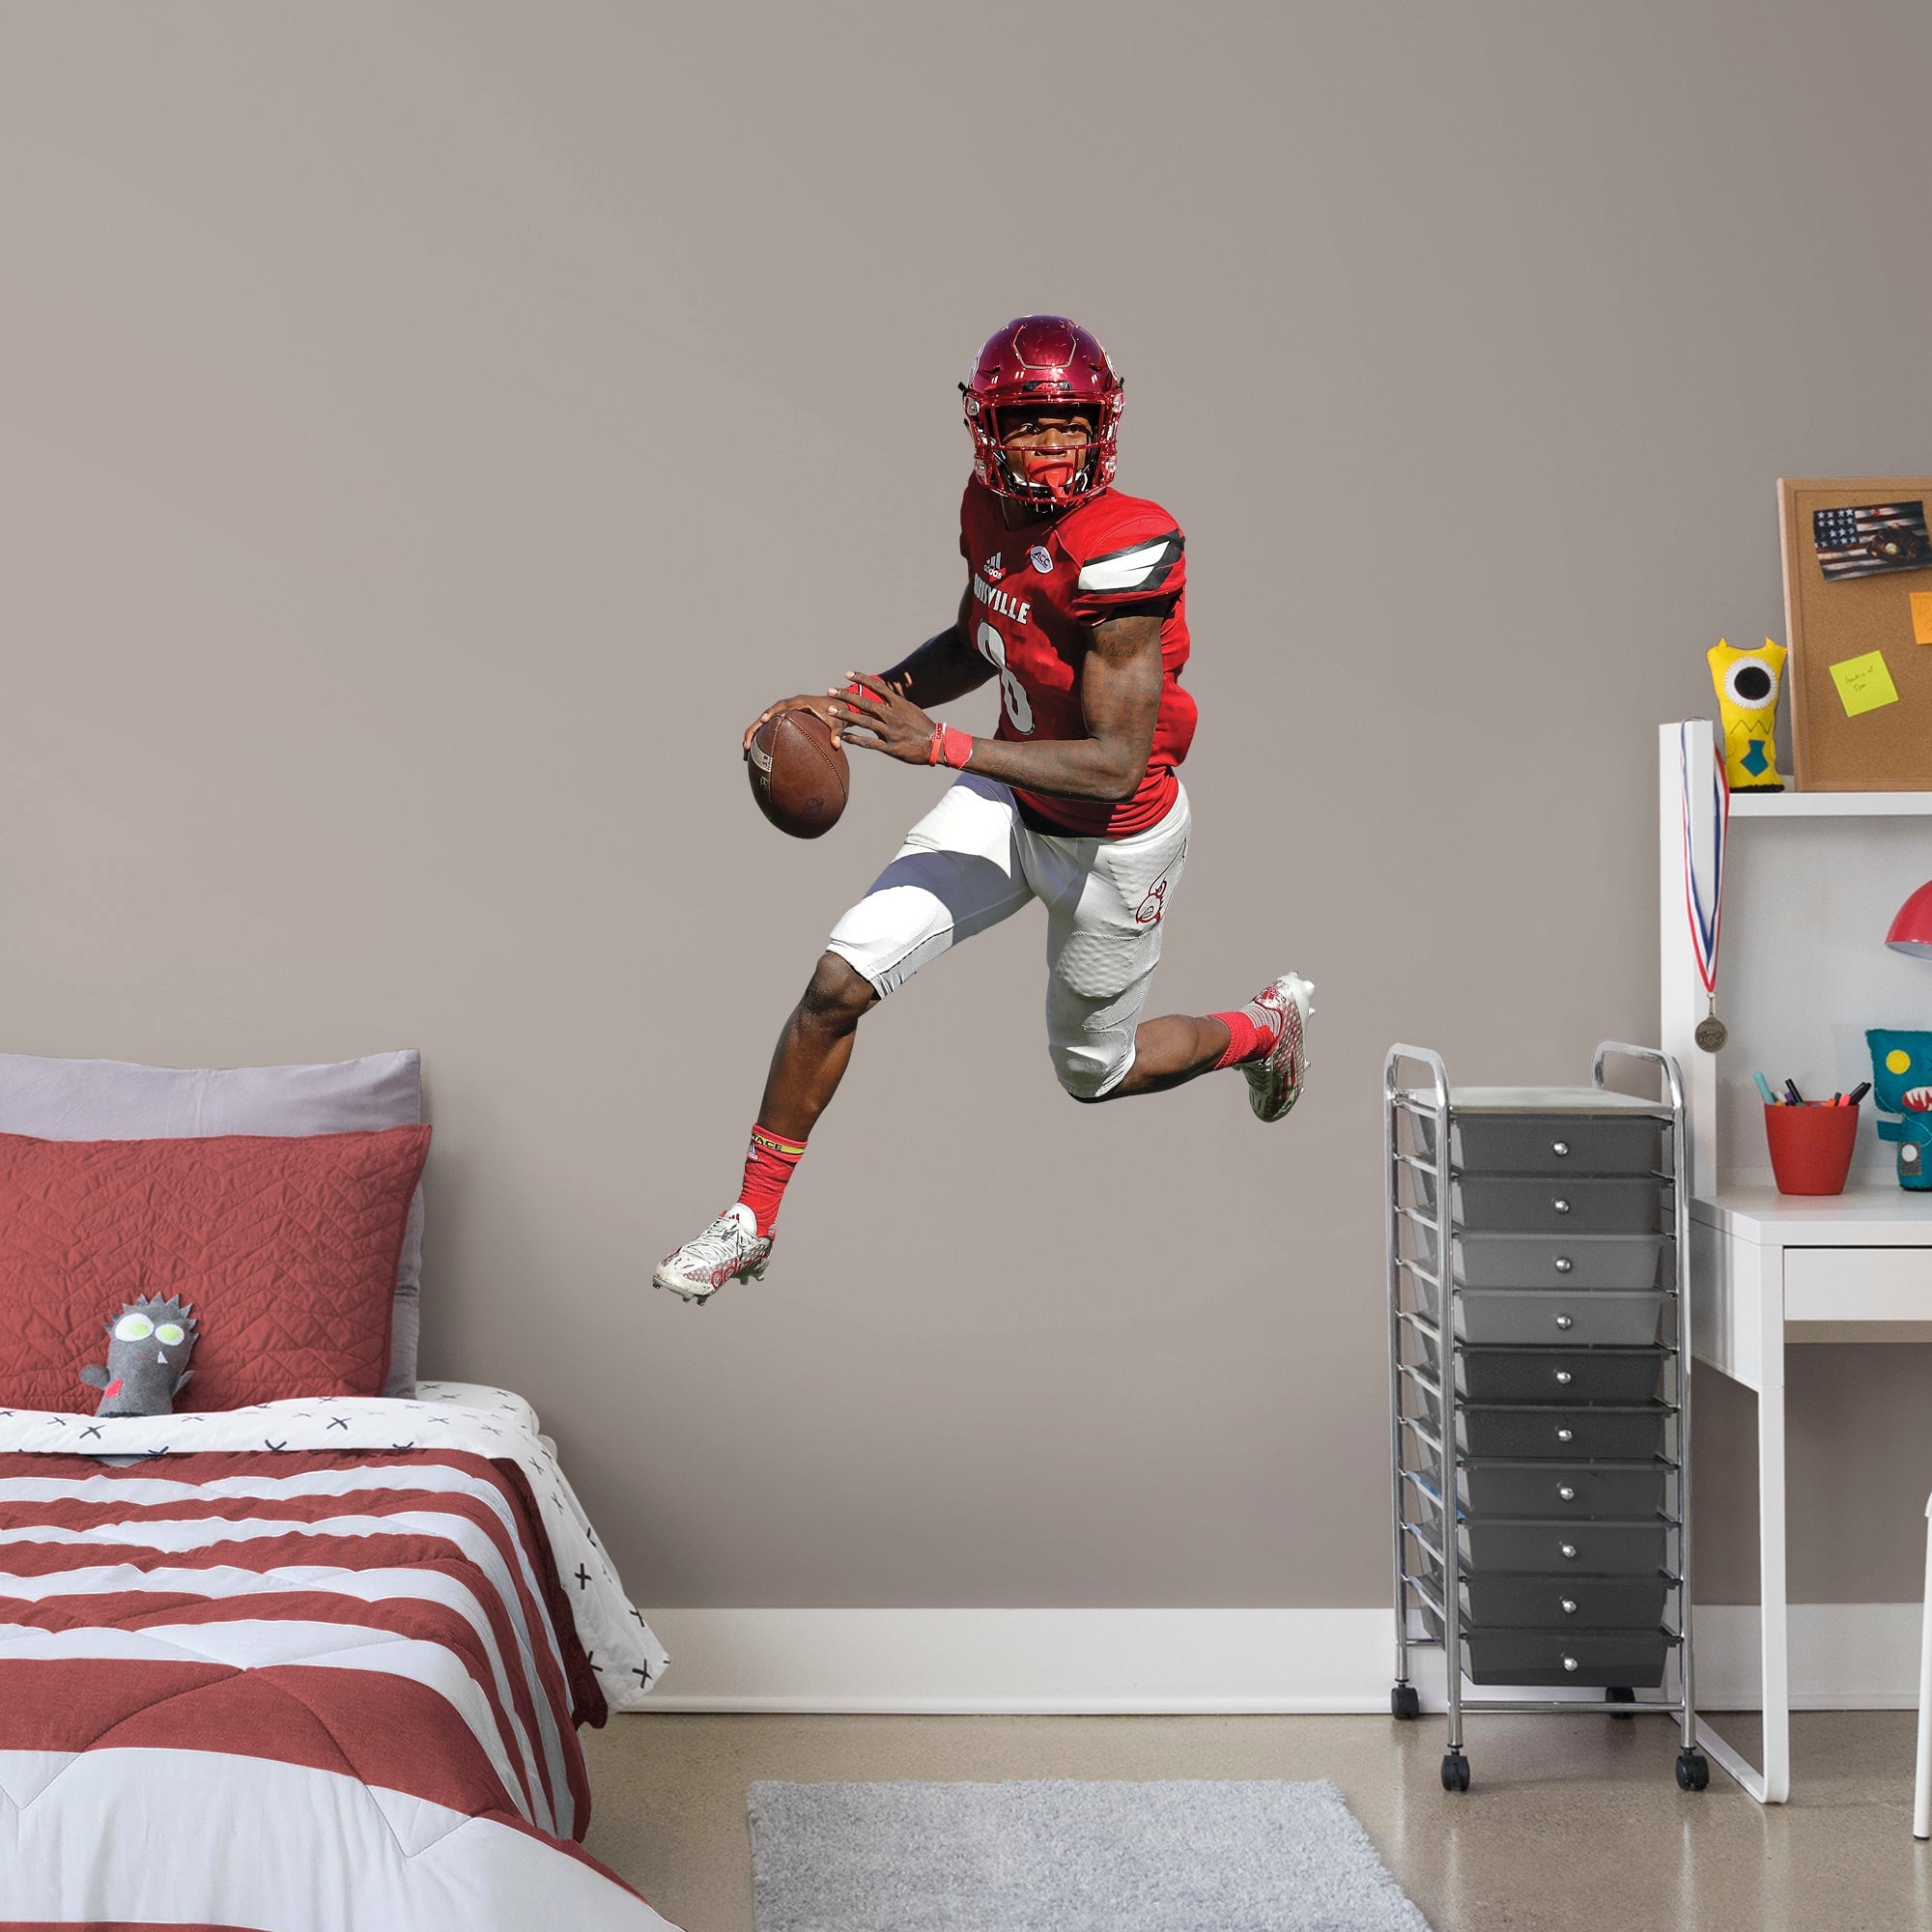 Lamar Jackson for Louisville Cardinals: Louisville - Officially Licensed Removable Wall Decal Giant Athlete + 2 Decals (31"W x 5